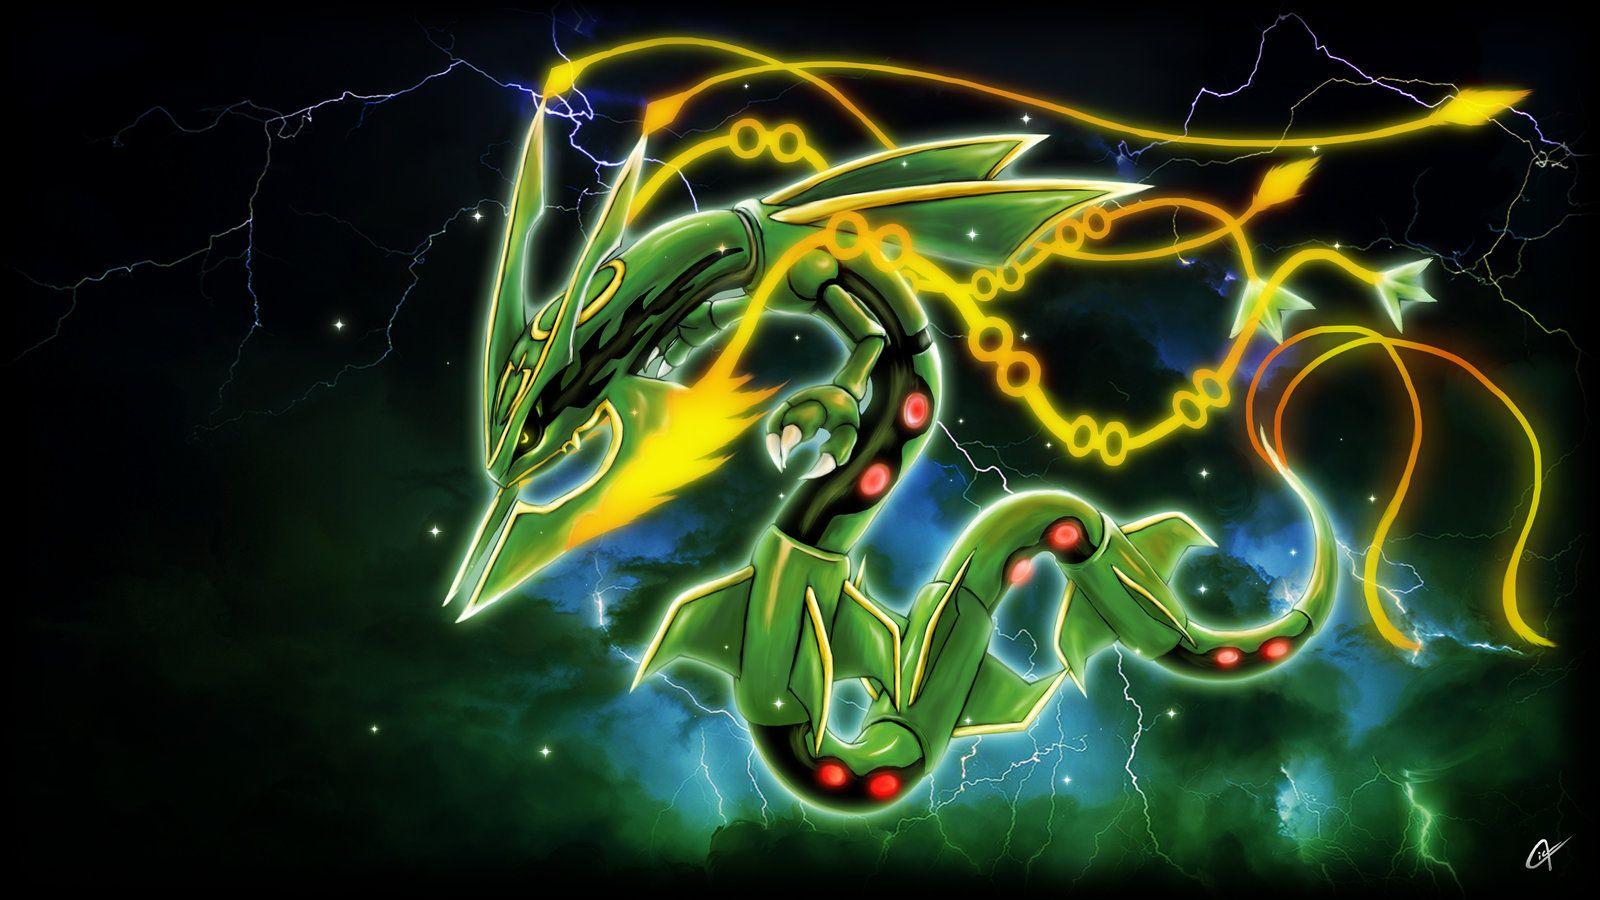 Wallpaper ID 439198  Video Game Pokémon Omega Ruby and Alpha Sapphire  Phone Wallpaper Mega Rayquaza Pokémon May Pokémon Mega Evolution  Pokémon Rayquaza Pokémon Mega Salamence Pokémon 750x1334 free  download